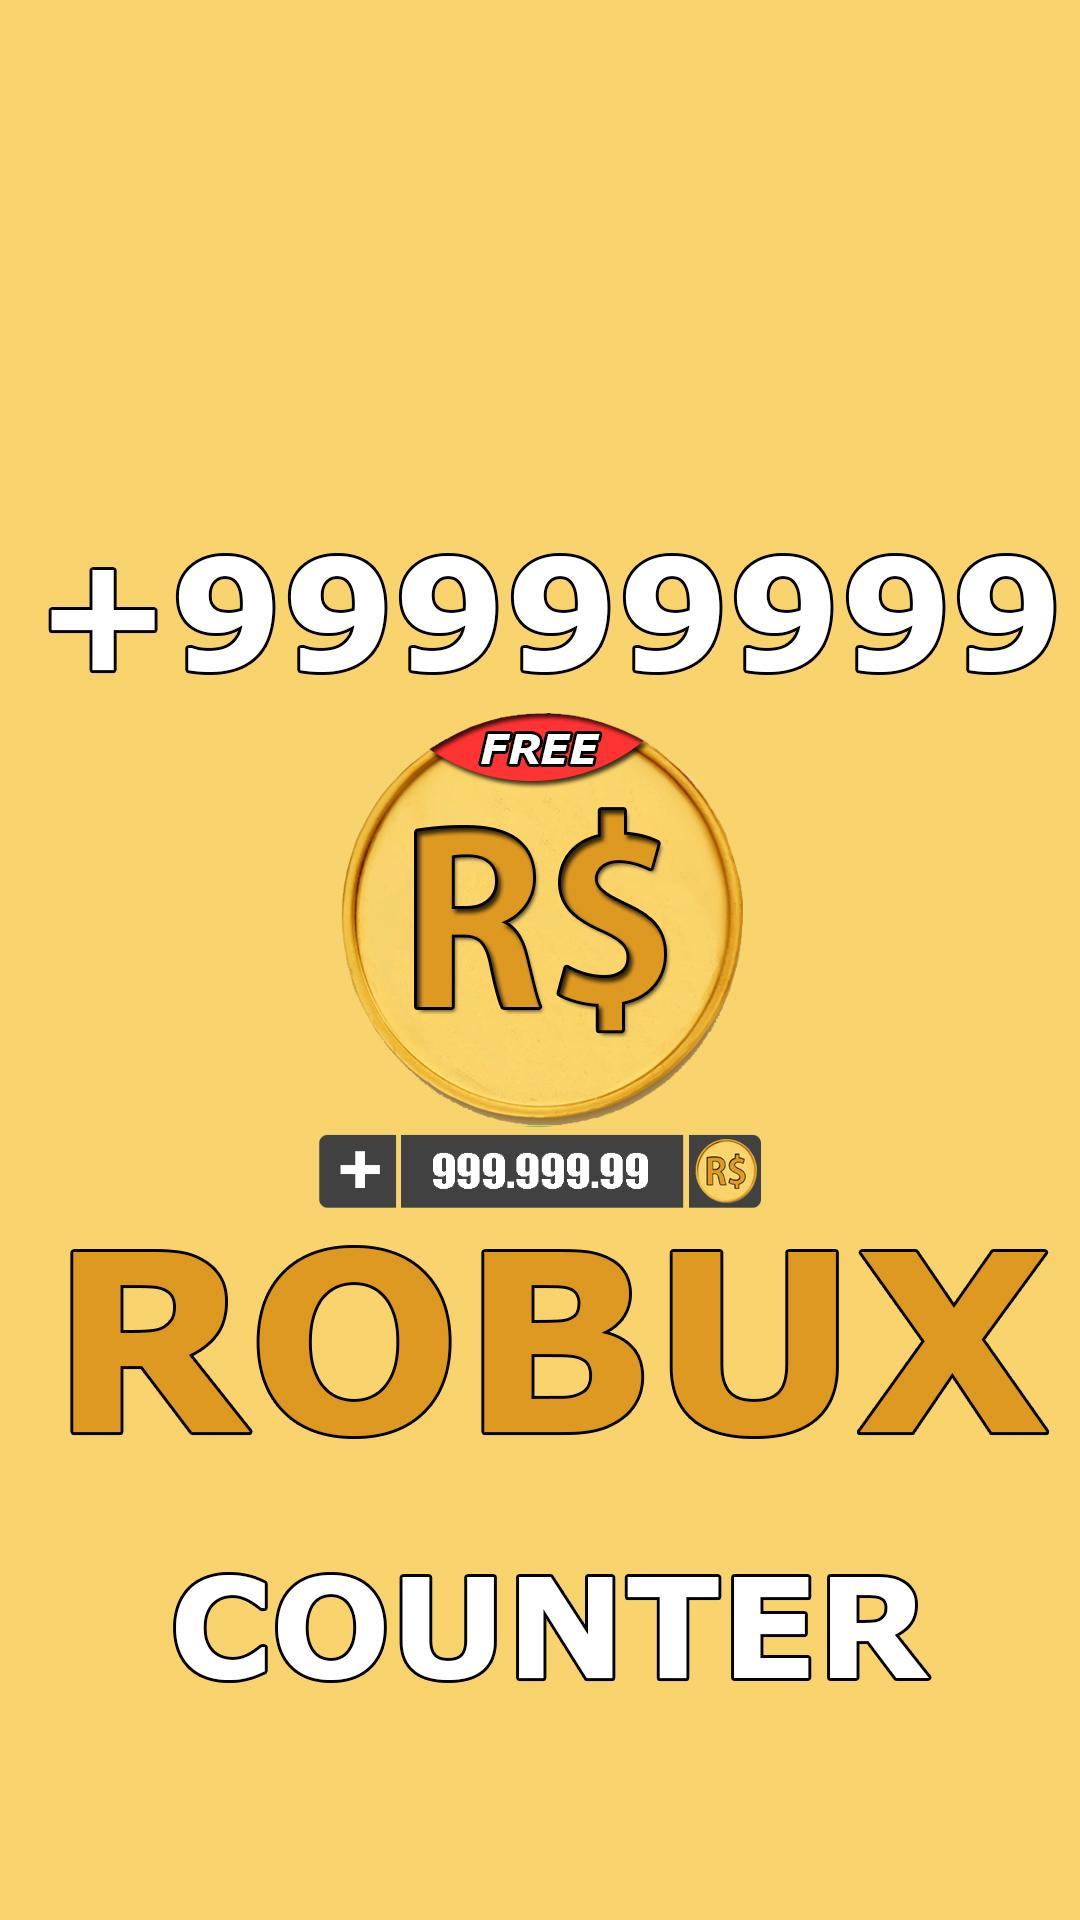 Get Robux Free Counter Rbx Free Robux Codes Calc For Android Apk Download - how to get robux free codes